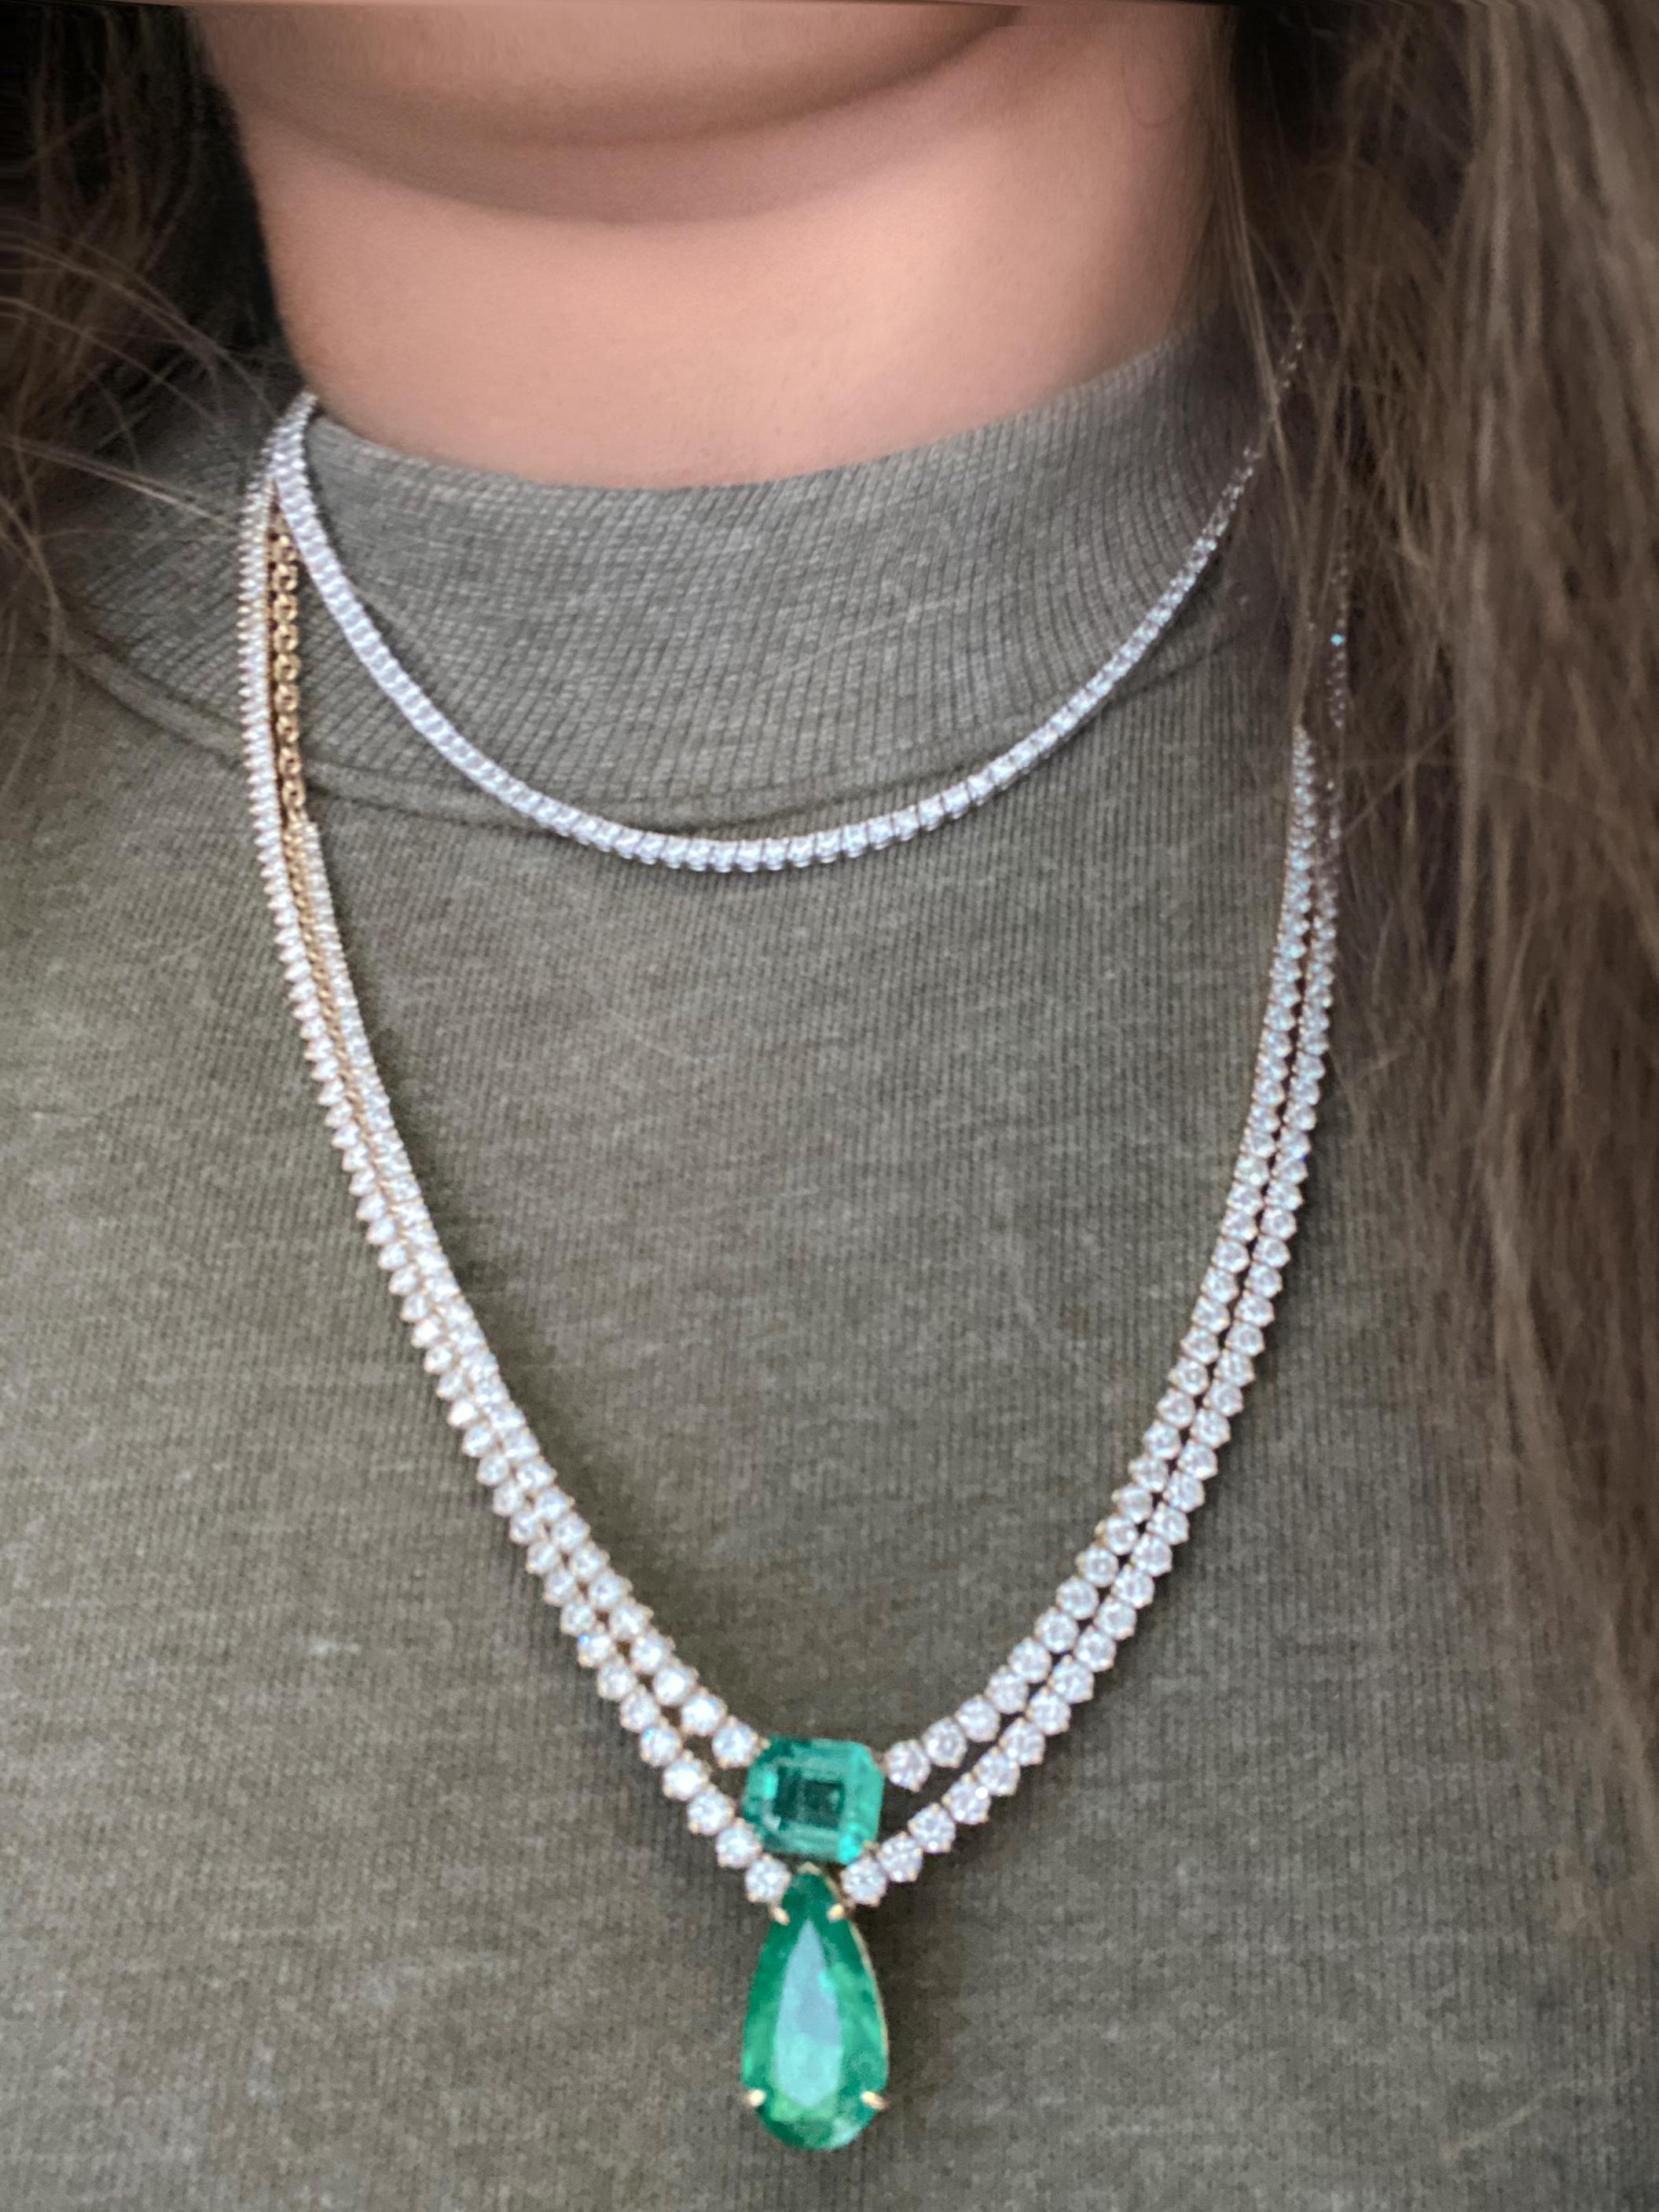 Statement 7.5 ct Emerald and Graduated Diamond Necklace For Sale 4